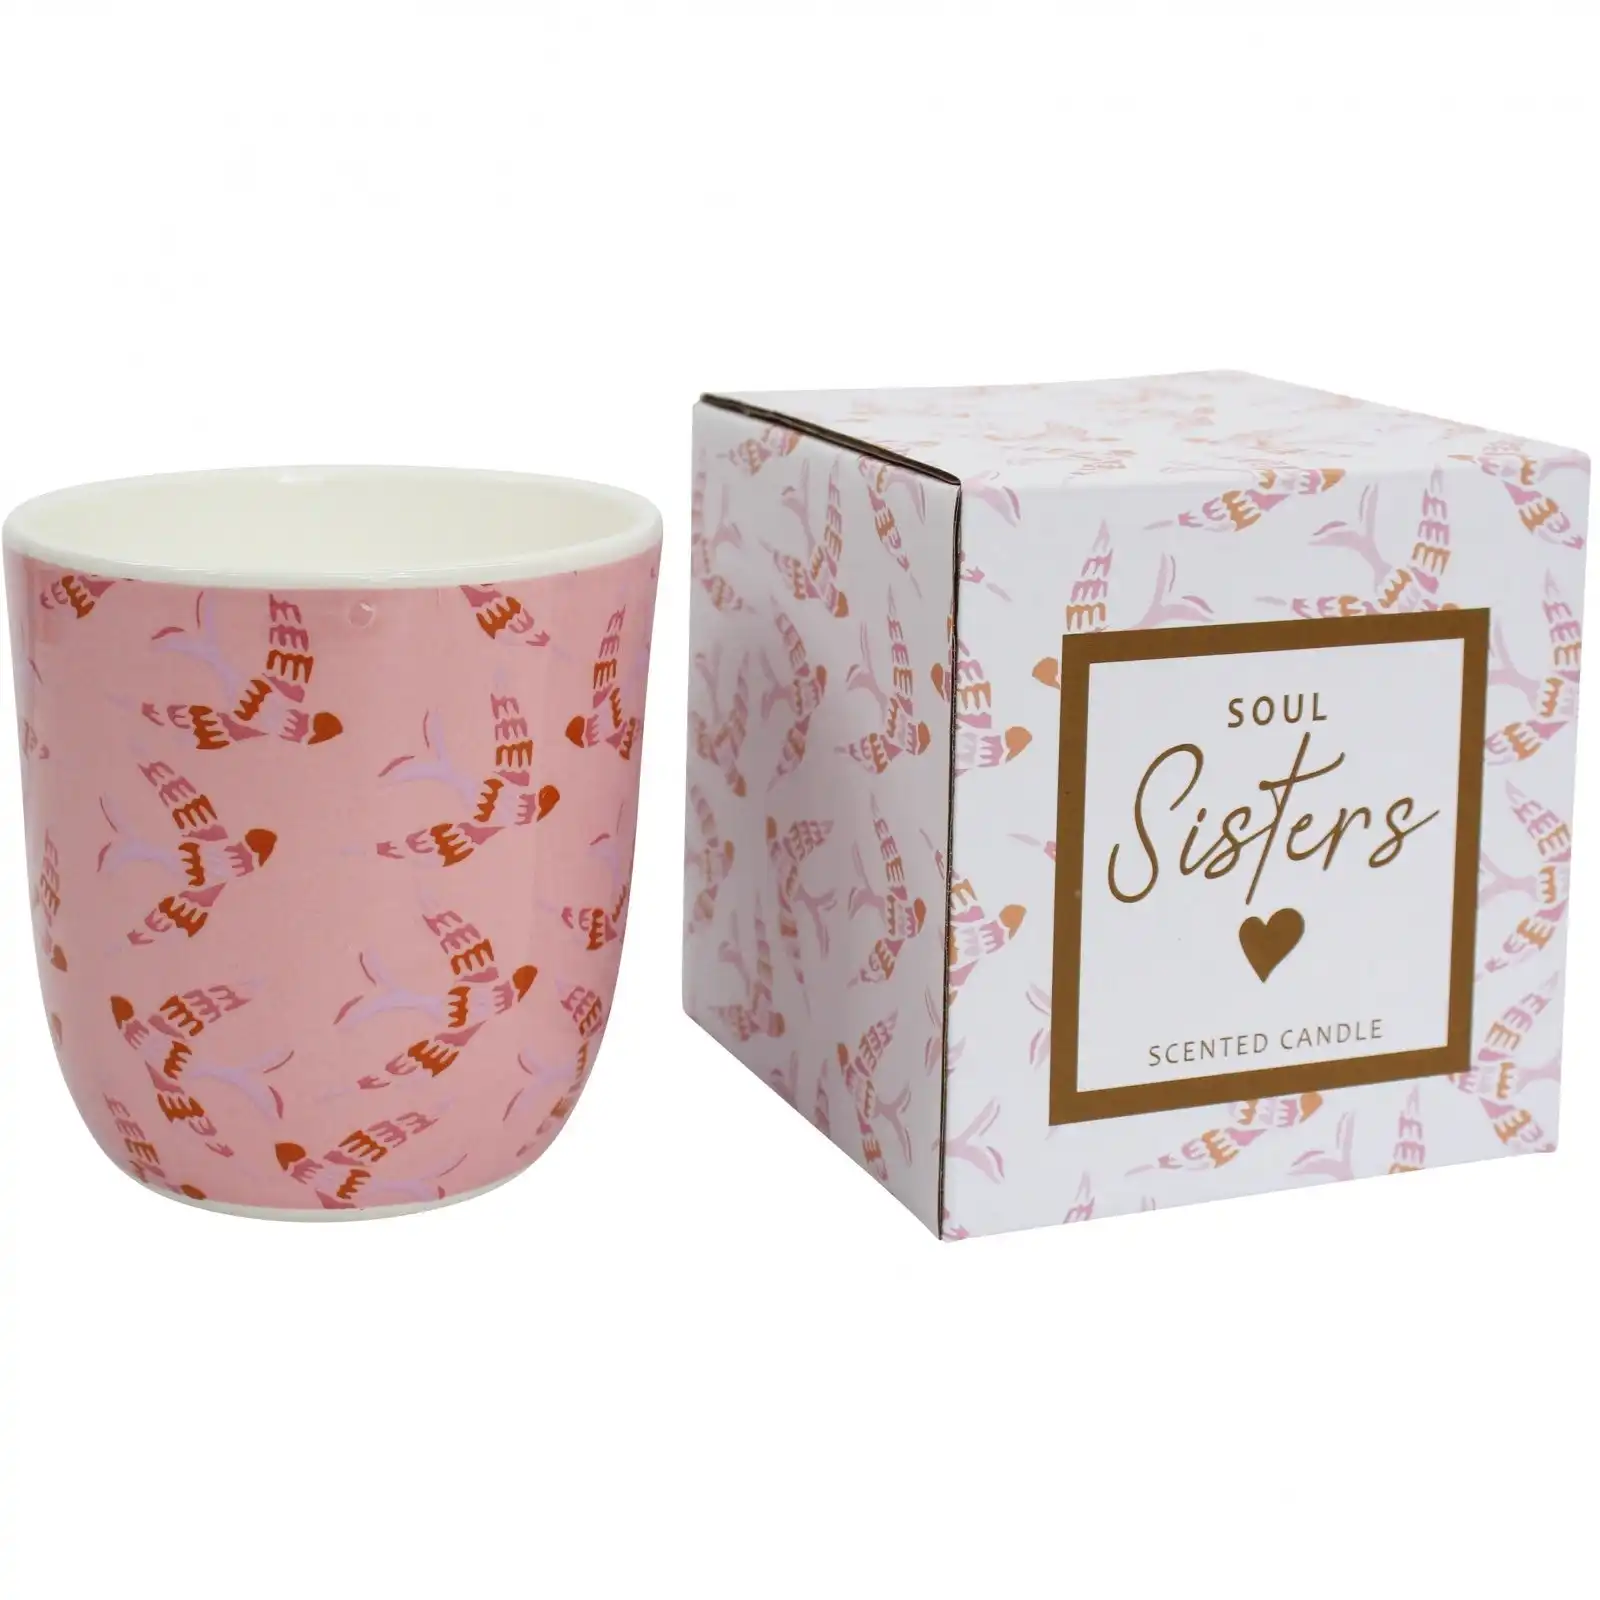 Candle Soul Sister Scented